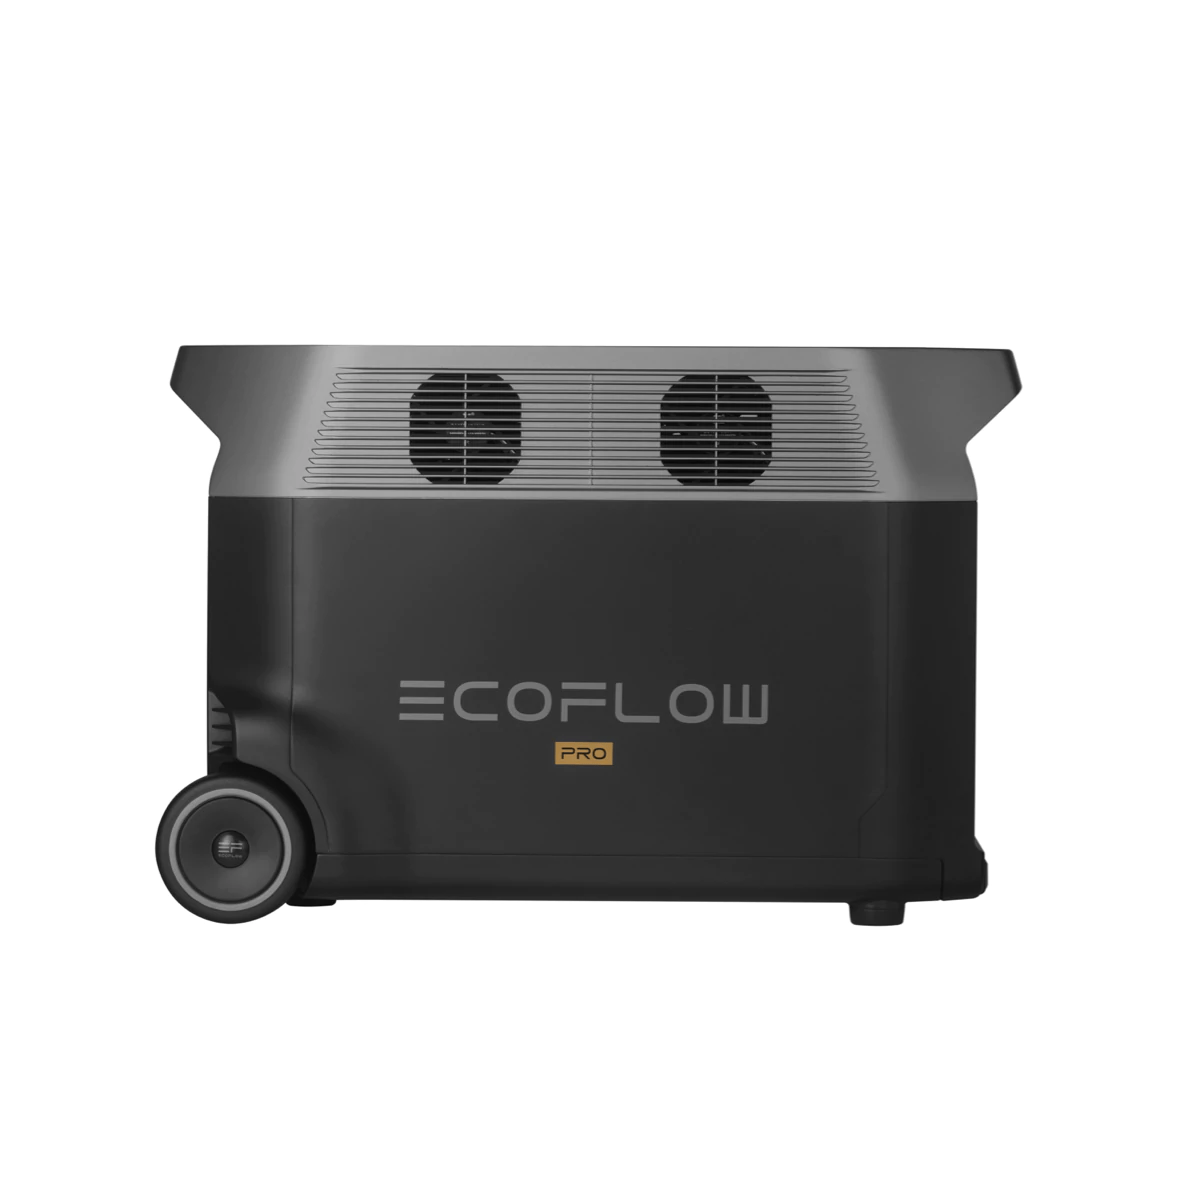 EcoFlow Delta Pro with 2 Extra Batteries - 10.8 kWh (Free 2x 220w Pane